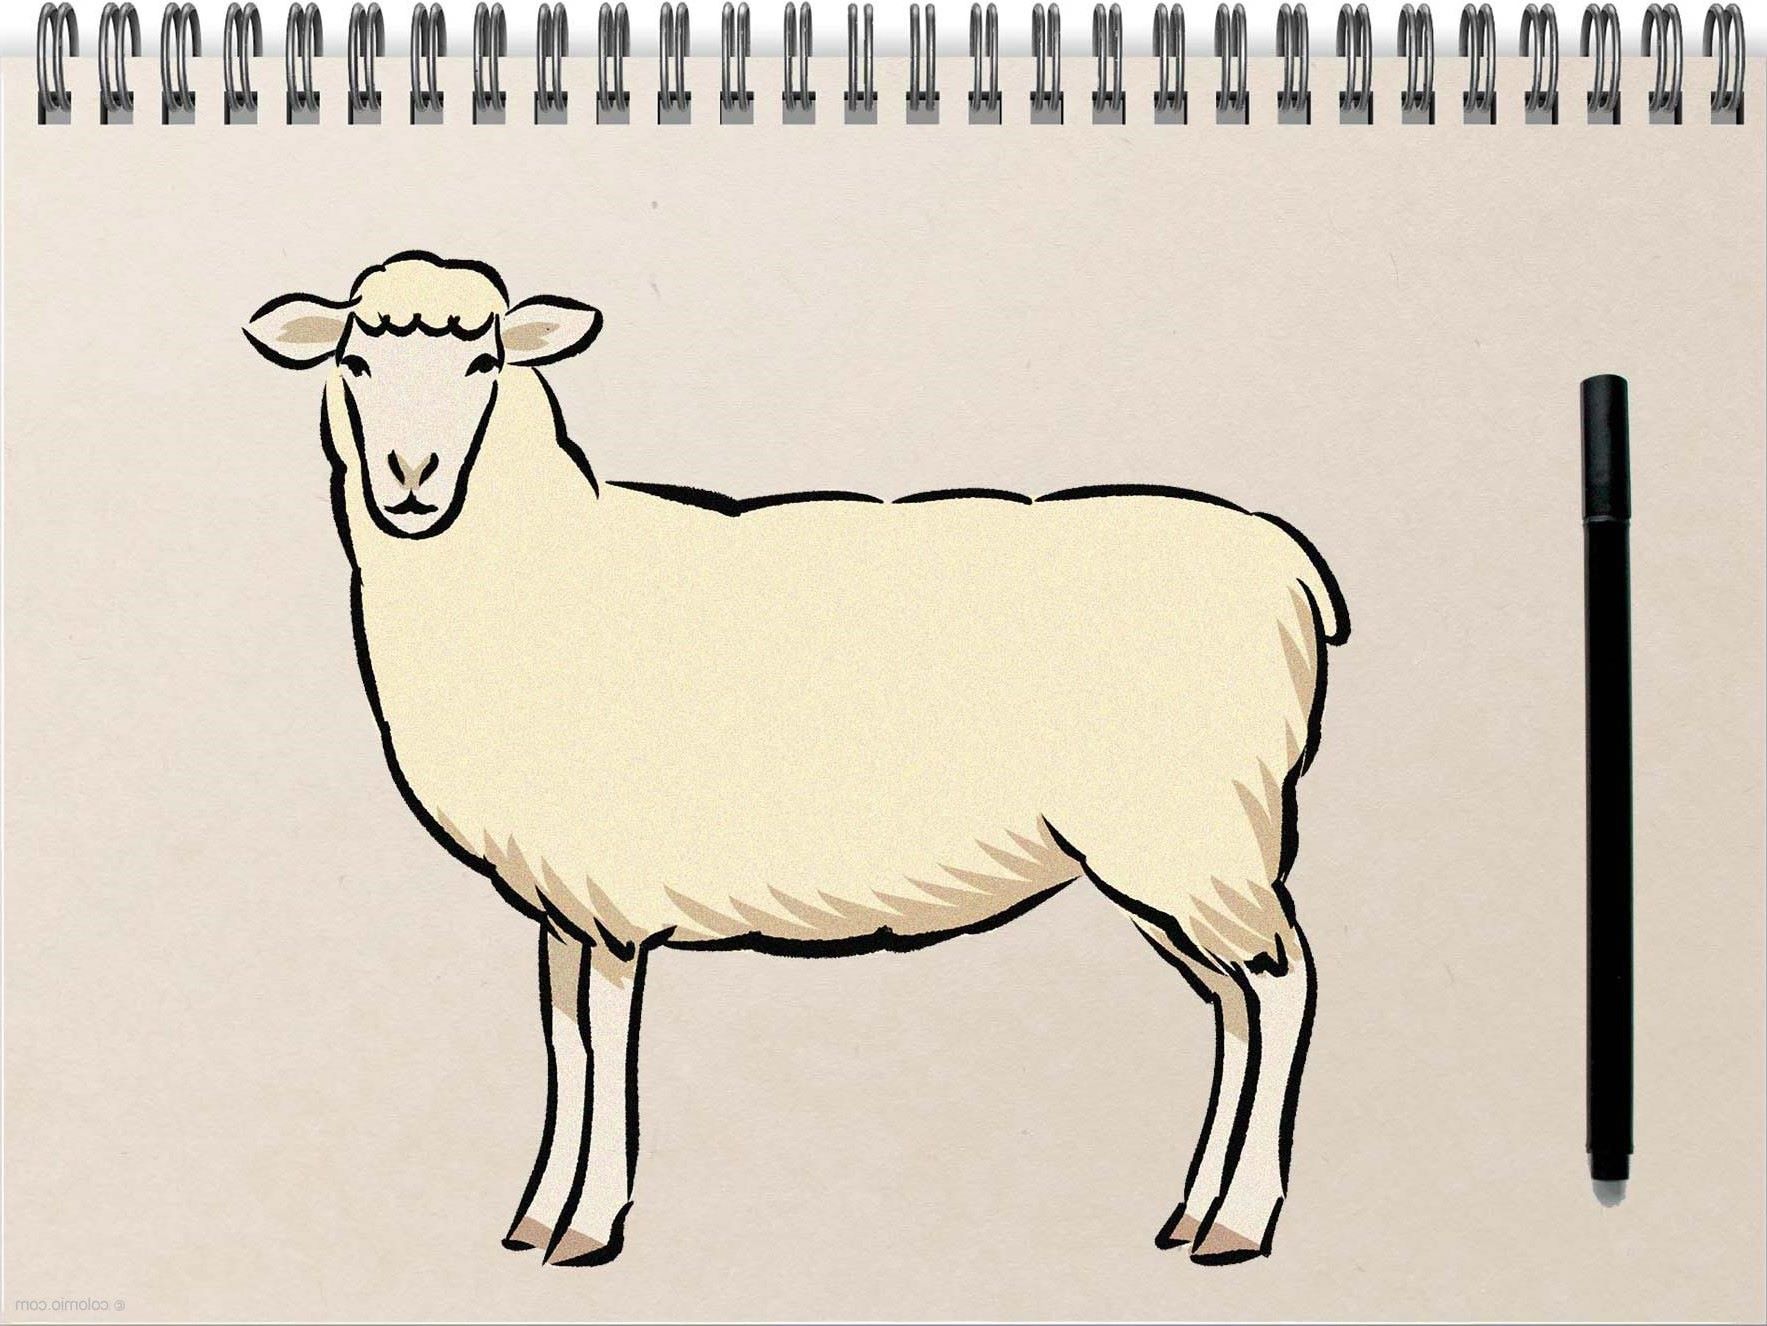 How To Draw A Sheep